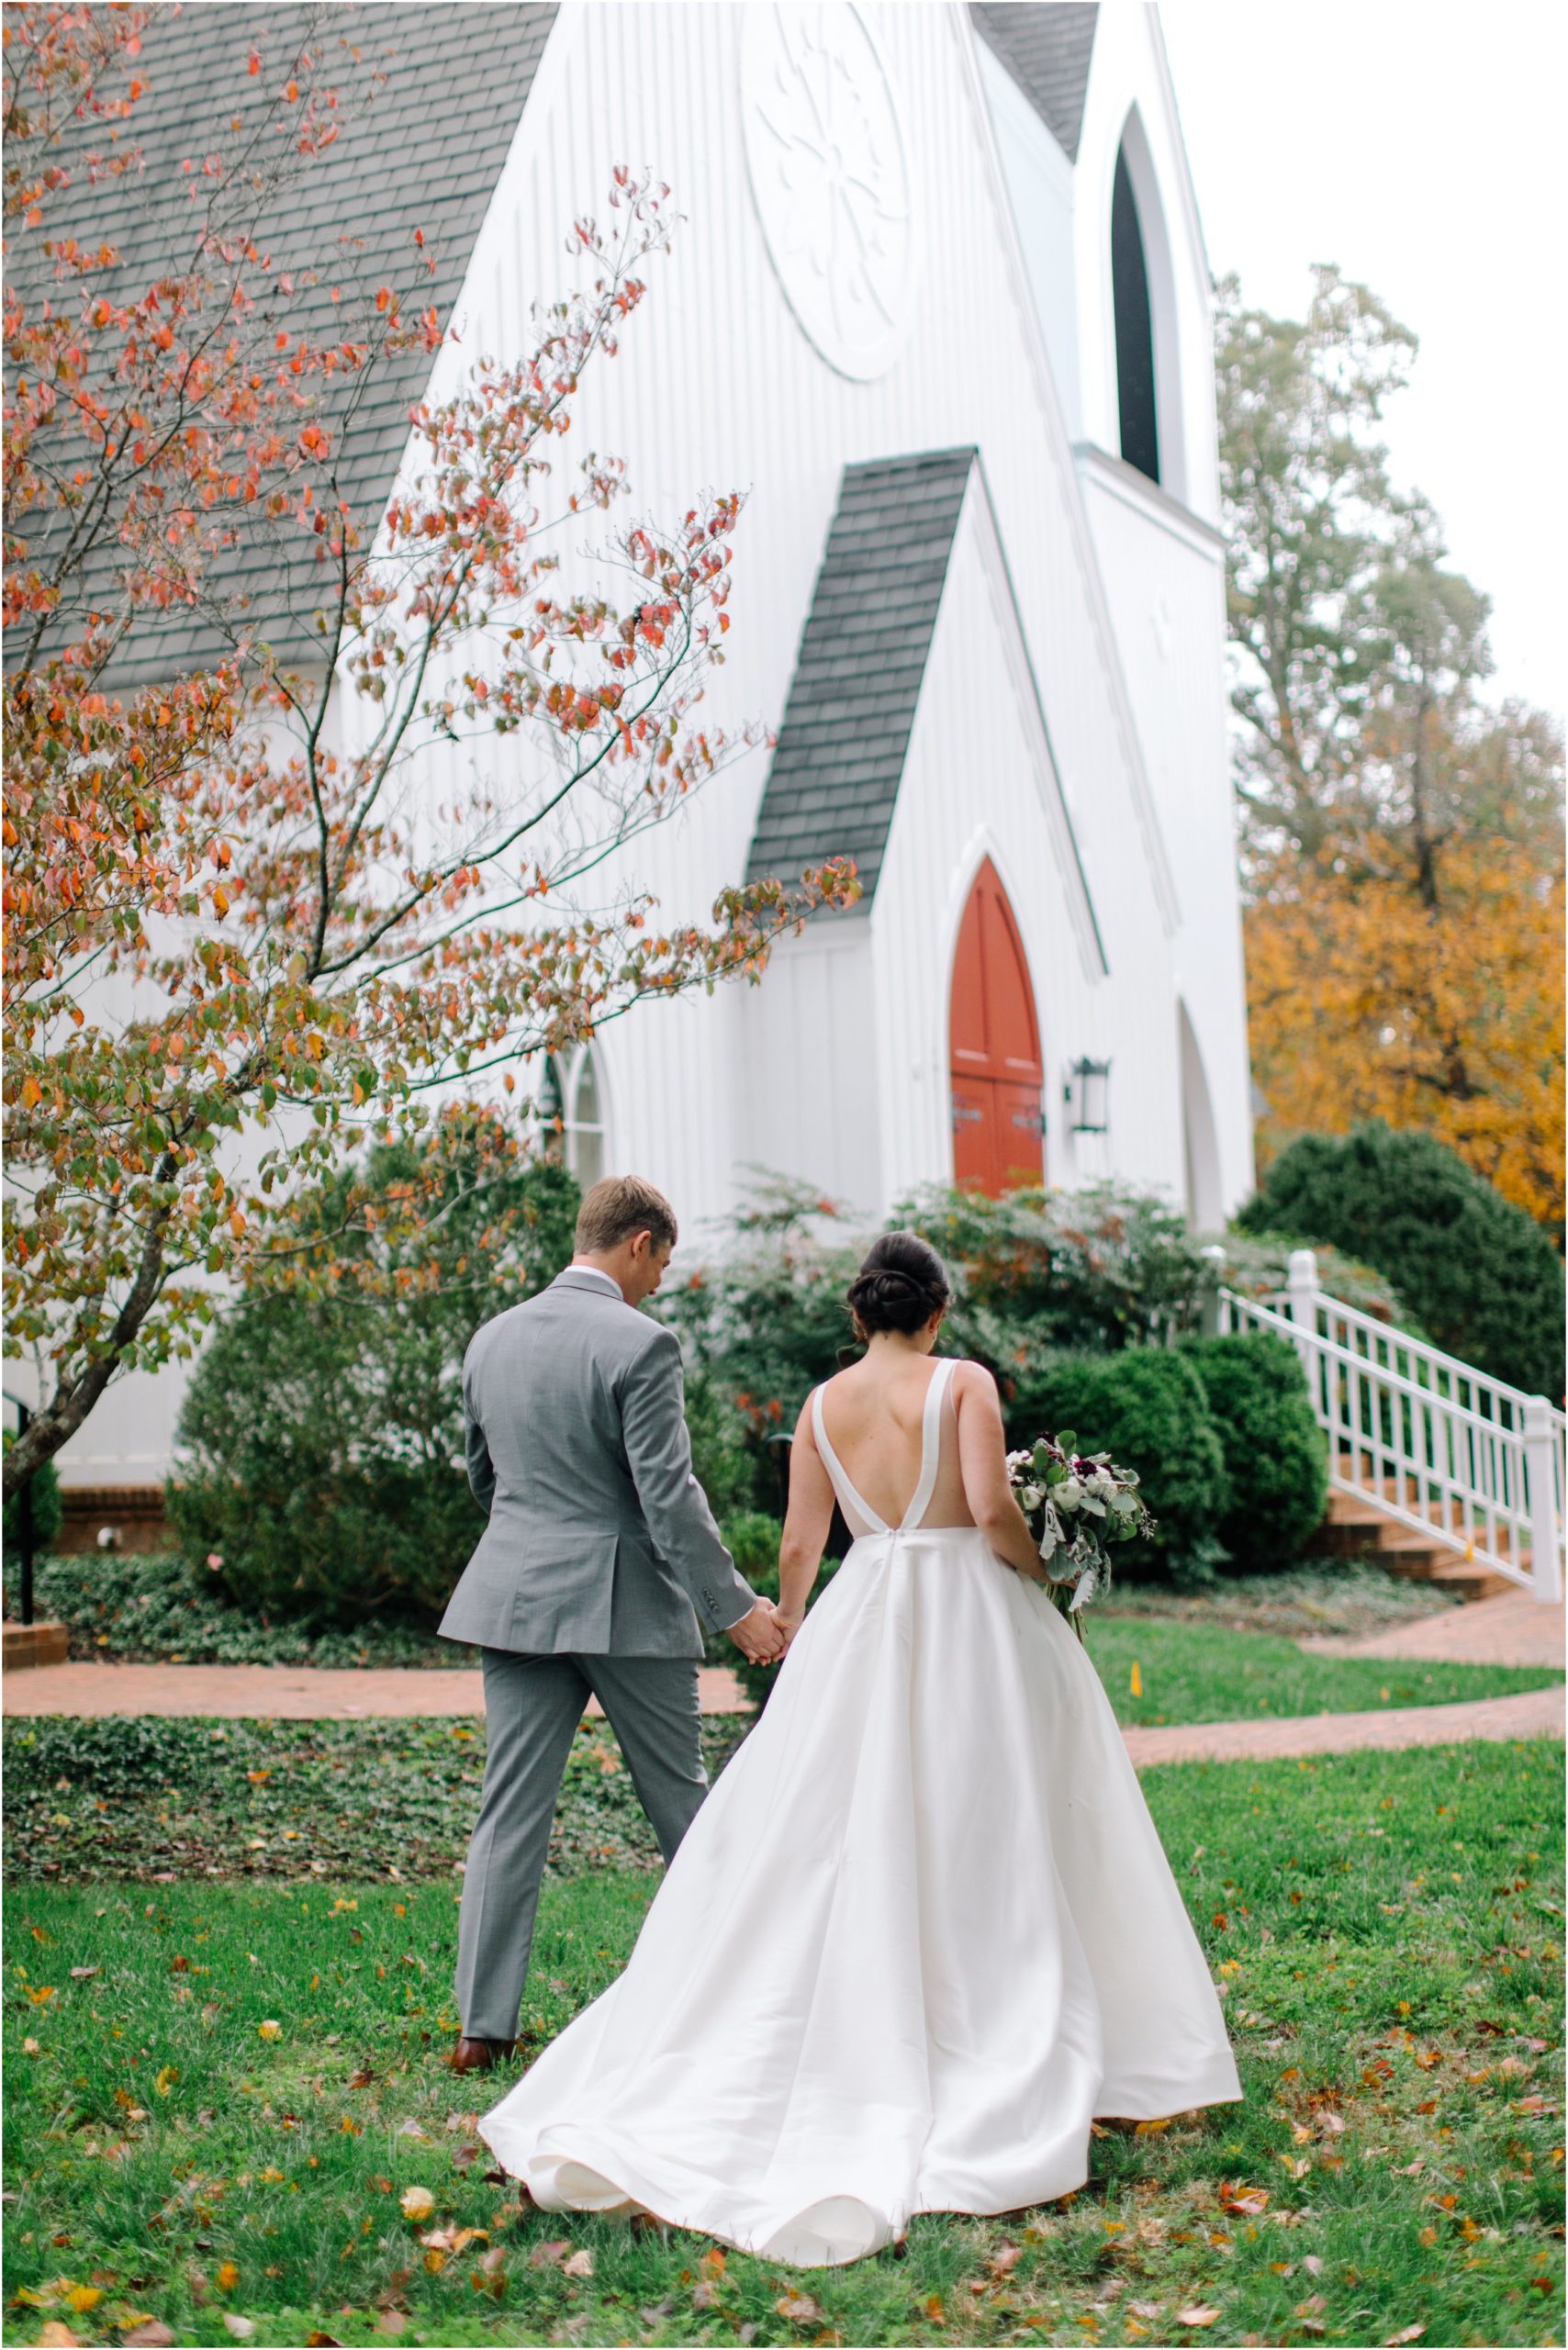 A couple walks to the church for their wedding on a fall day with leaves under their feet